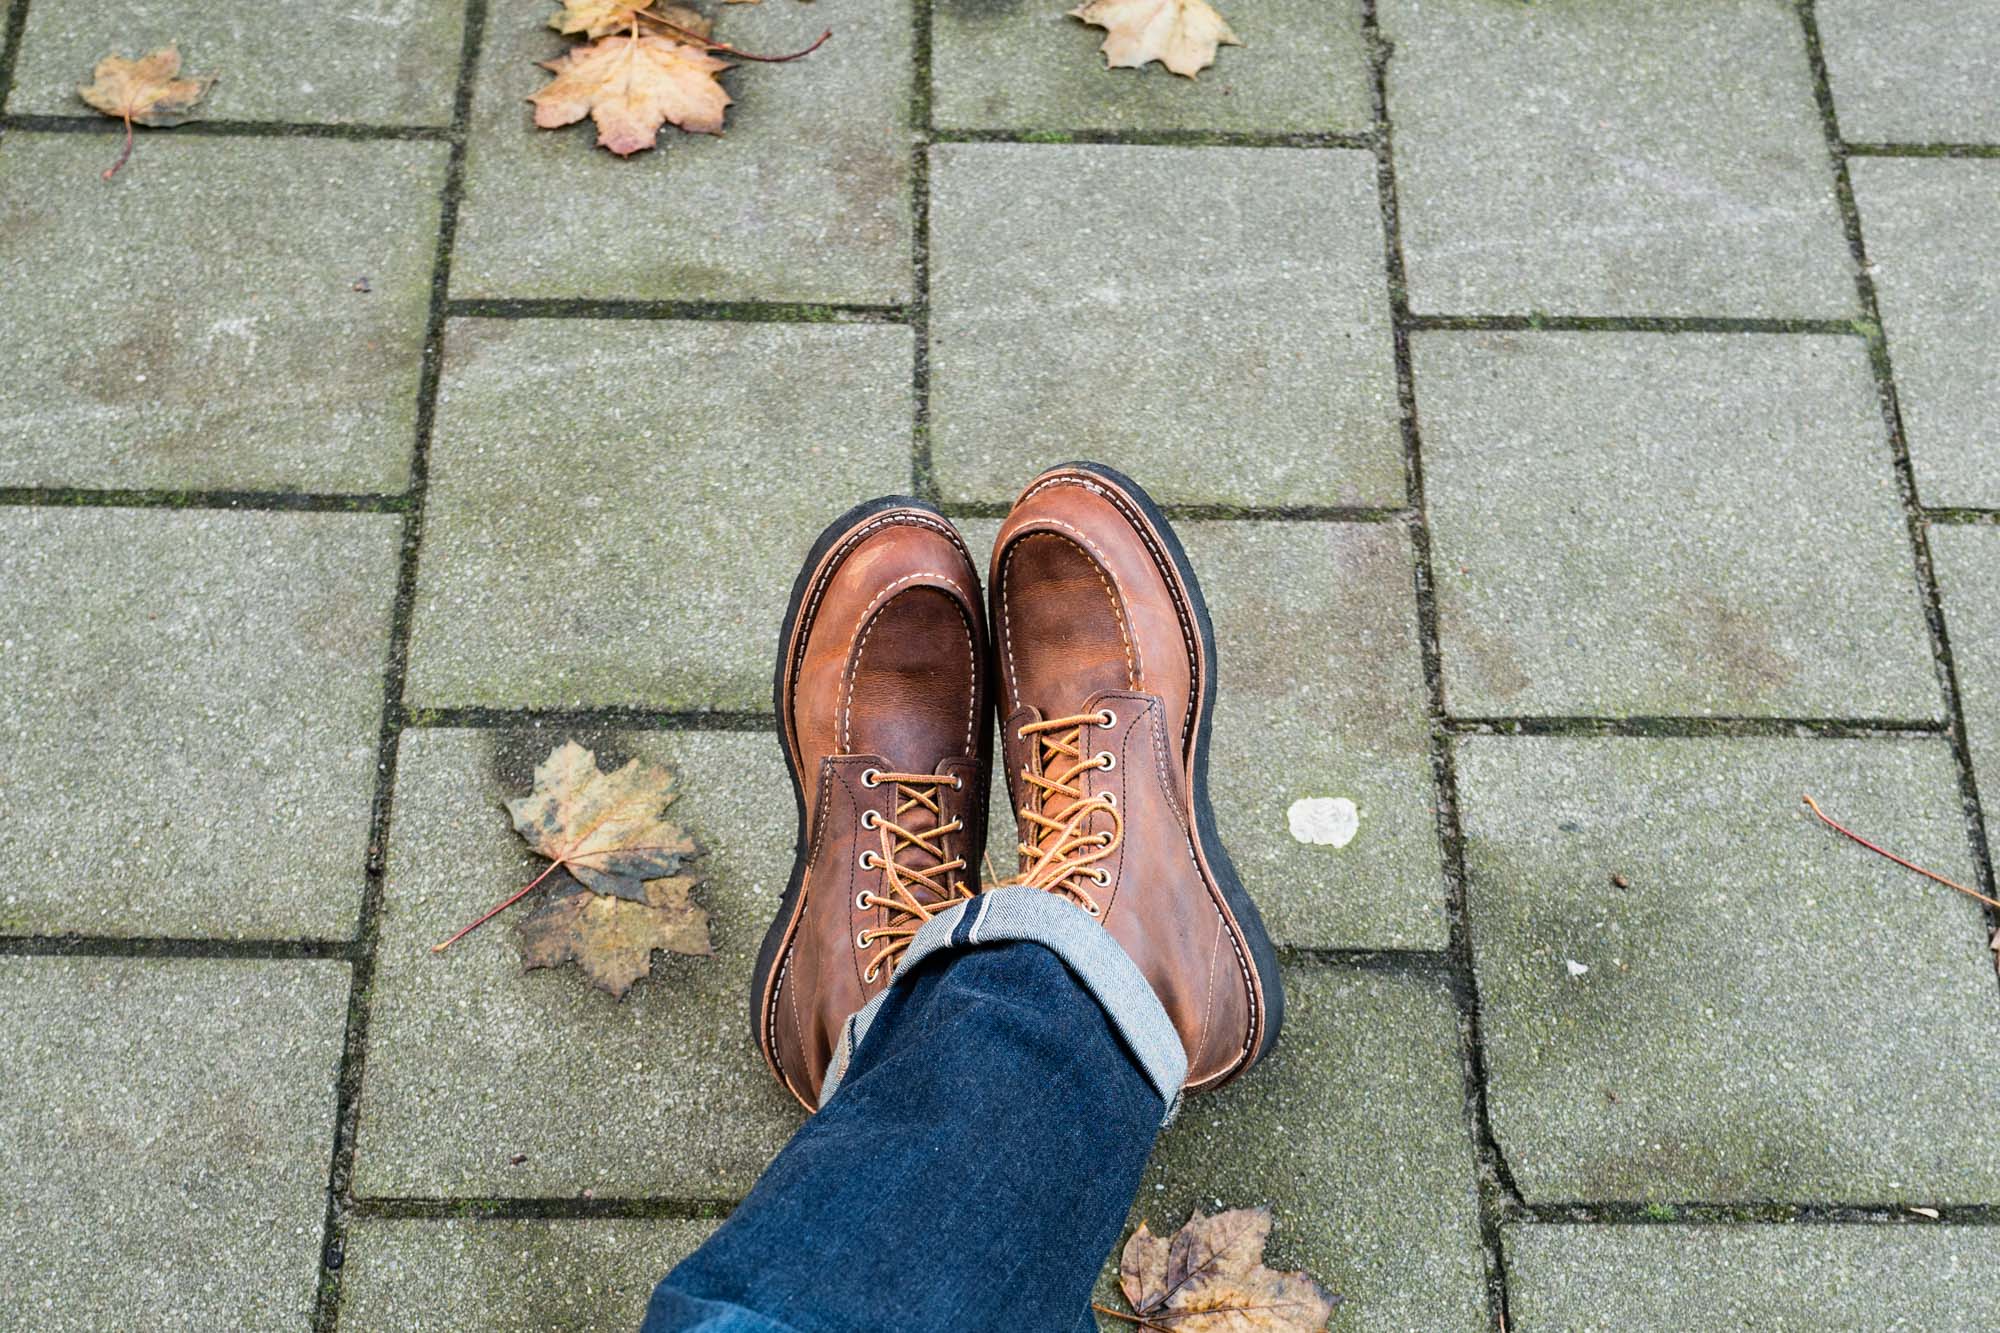 Red Wing shoes - Classic Moc Toe